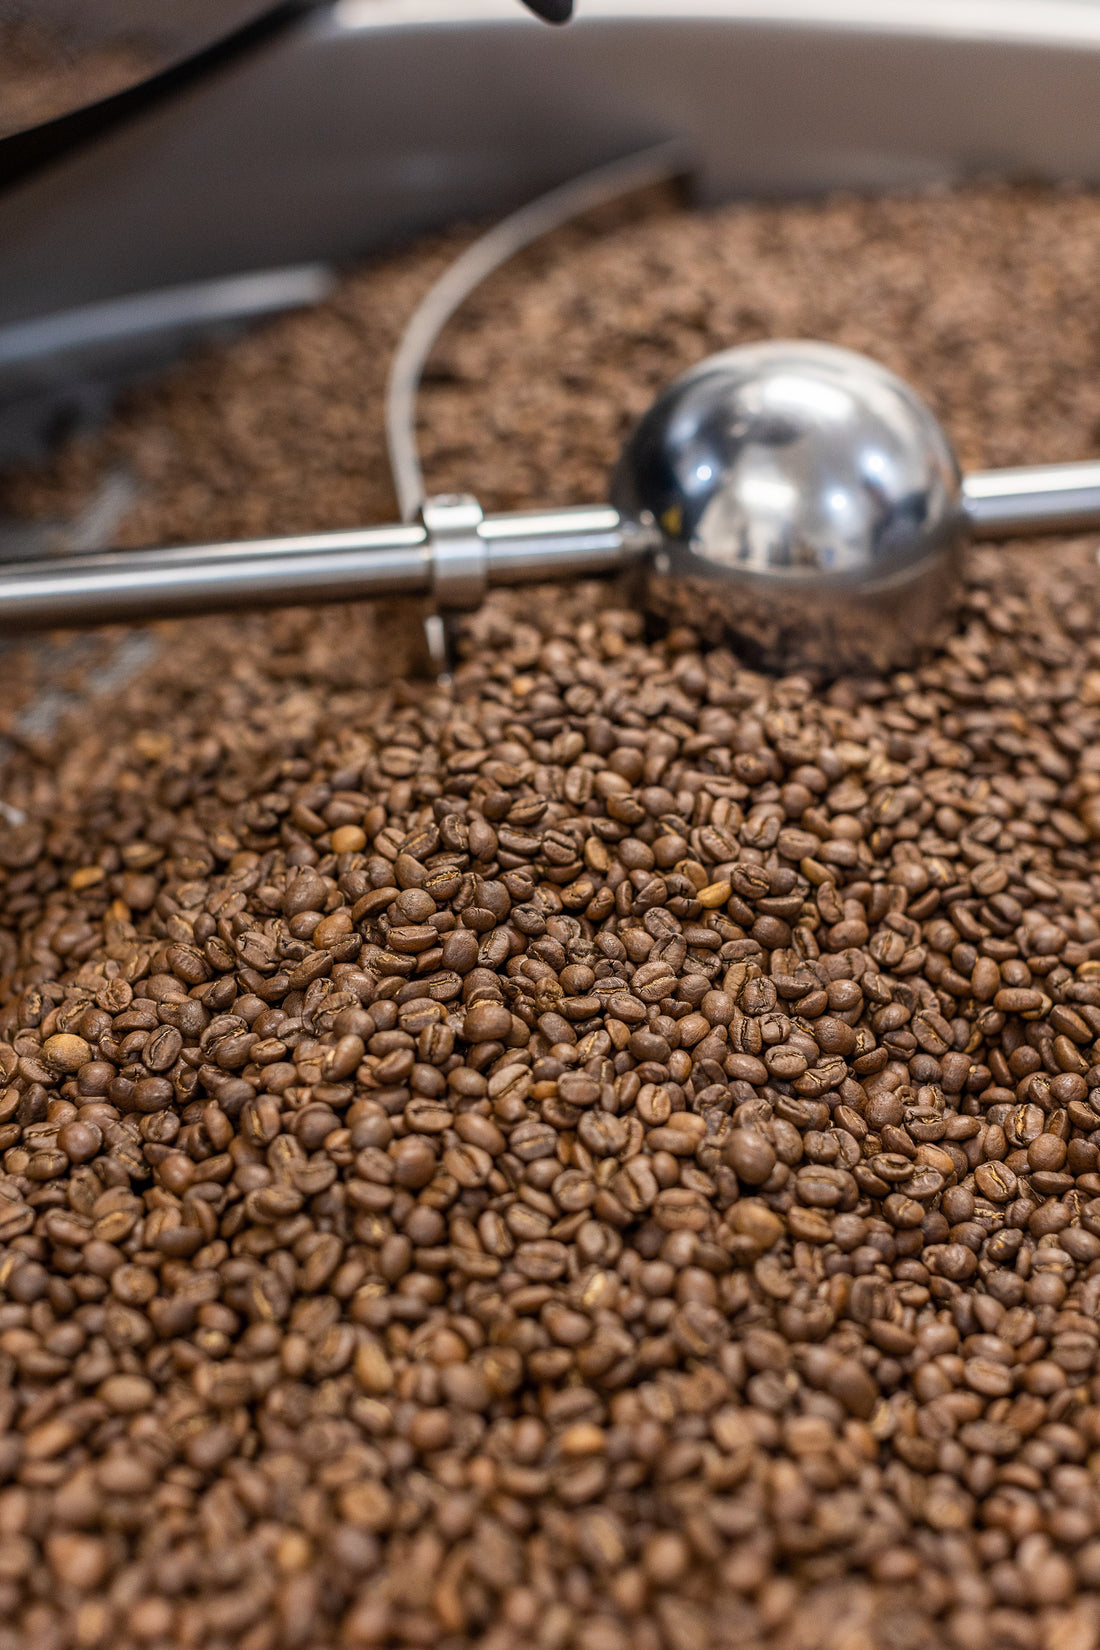 Roasted coffee beans being cooled